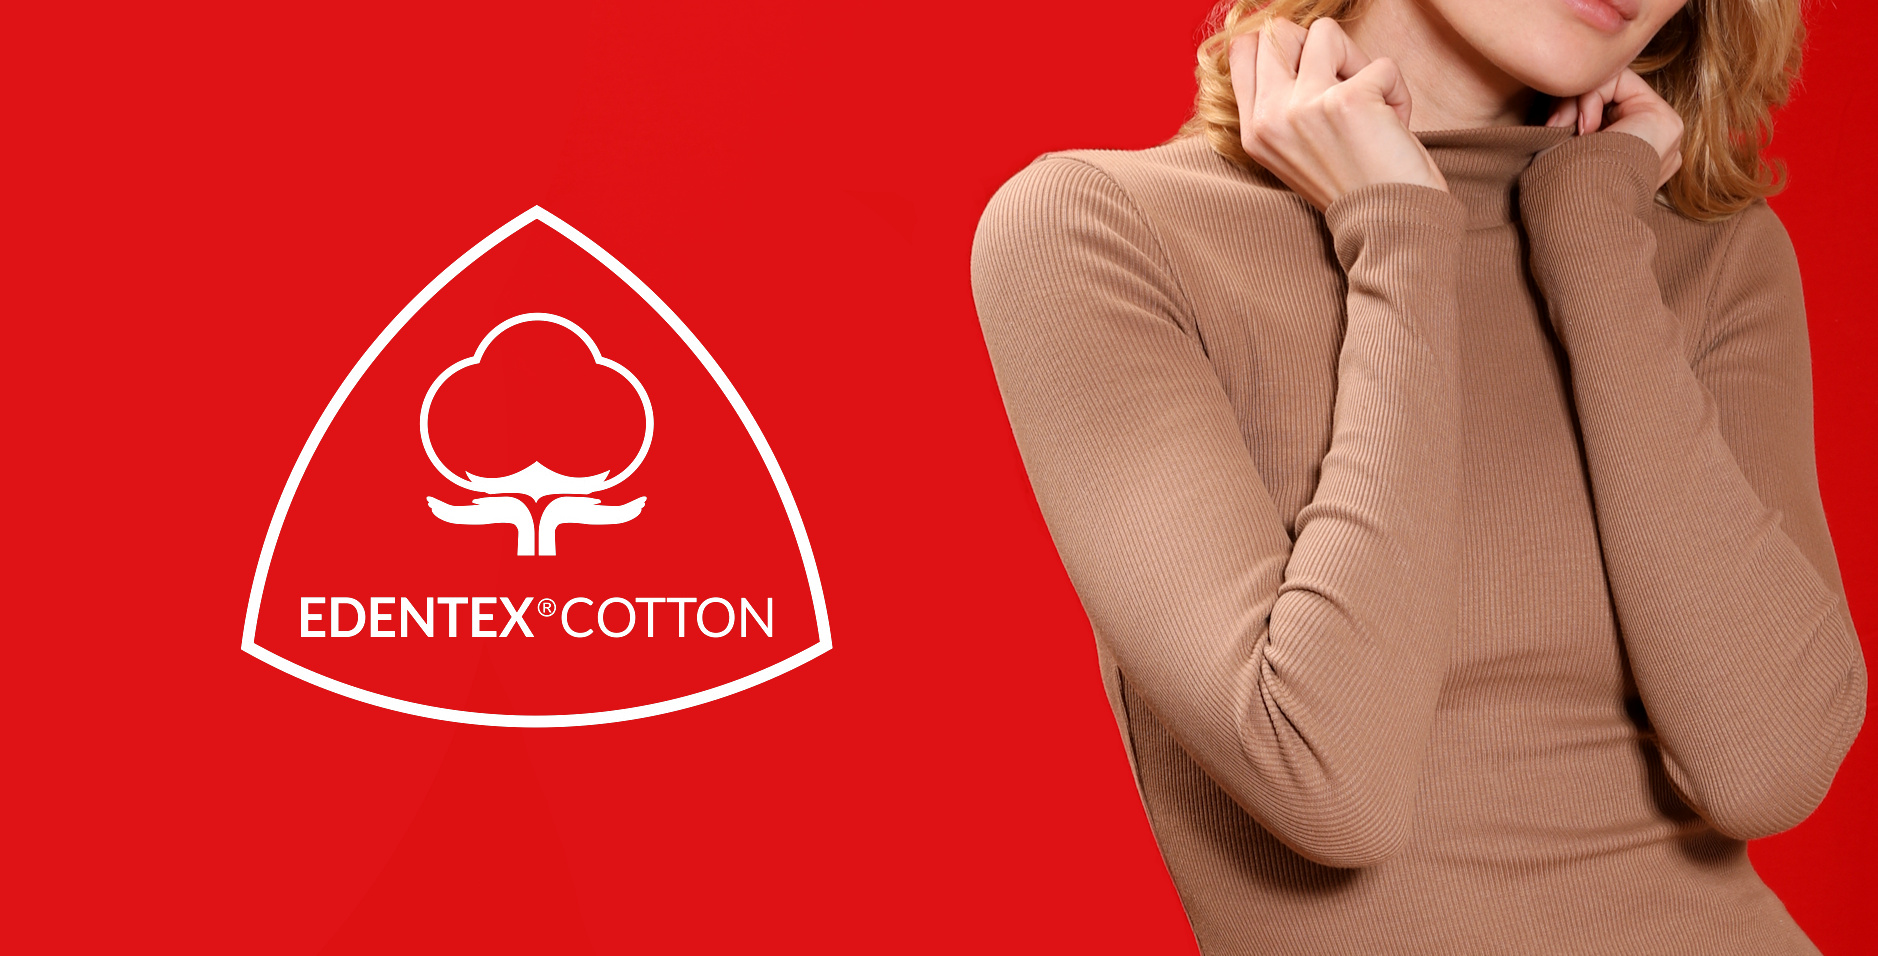 EDENTEX®COTTON: Fresh, new look even after many washings